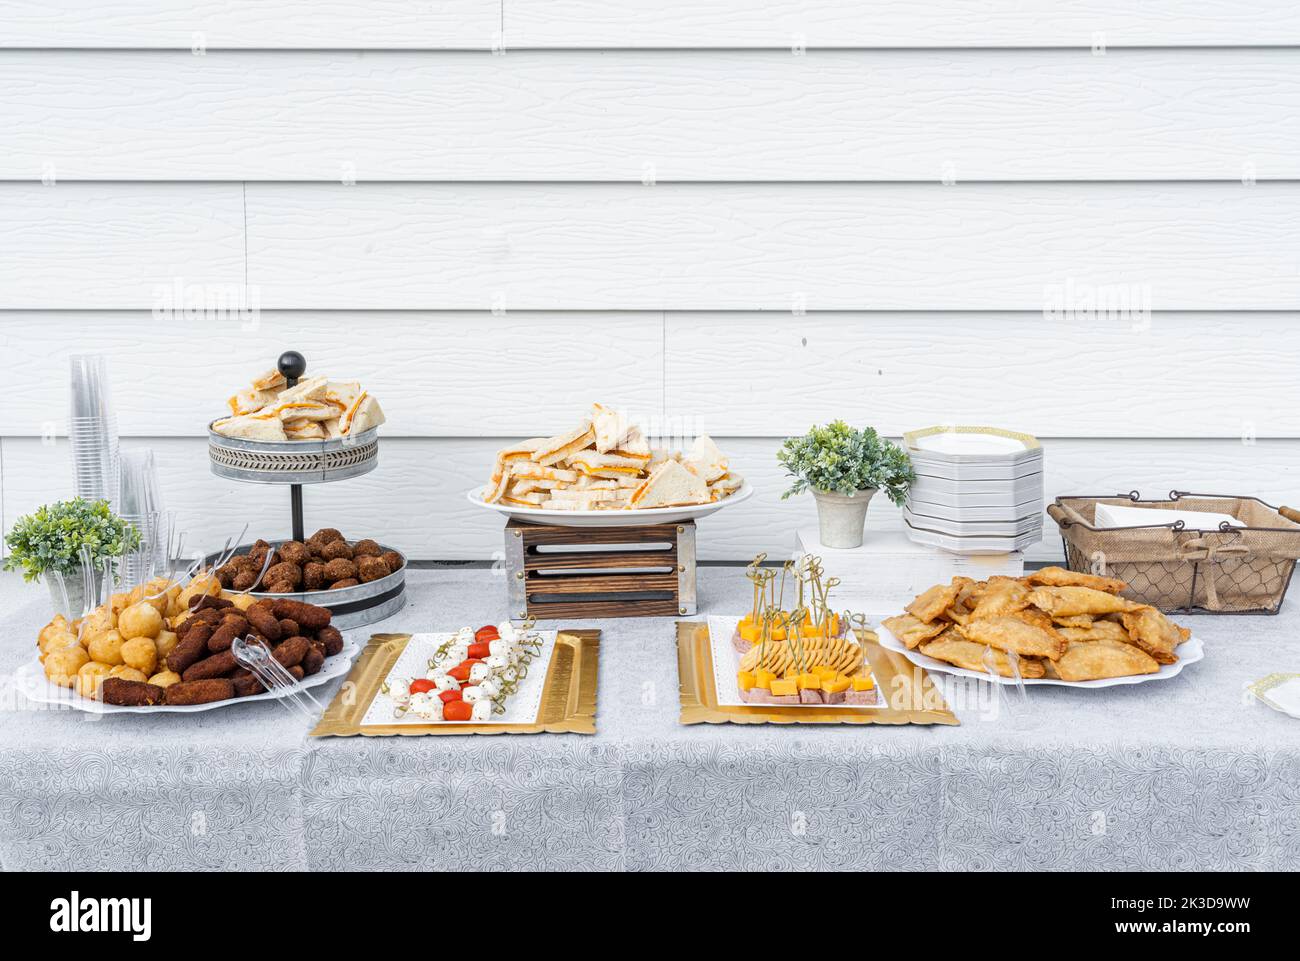 Dominican Influenced Appetizers served on the Table. Stock Photo